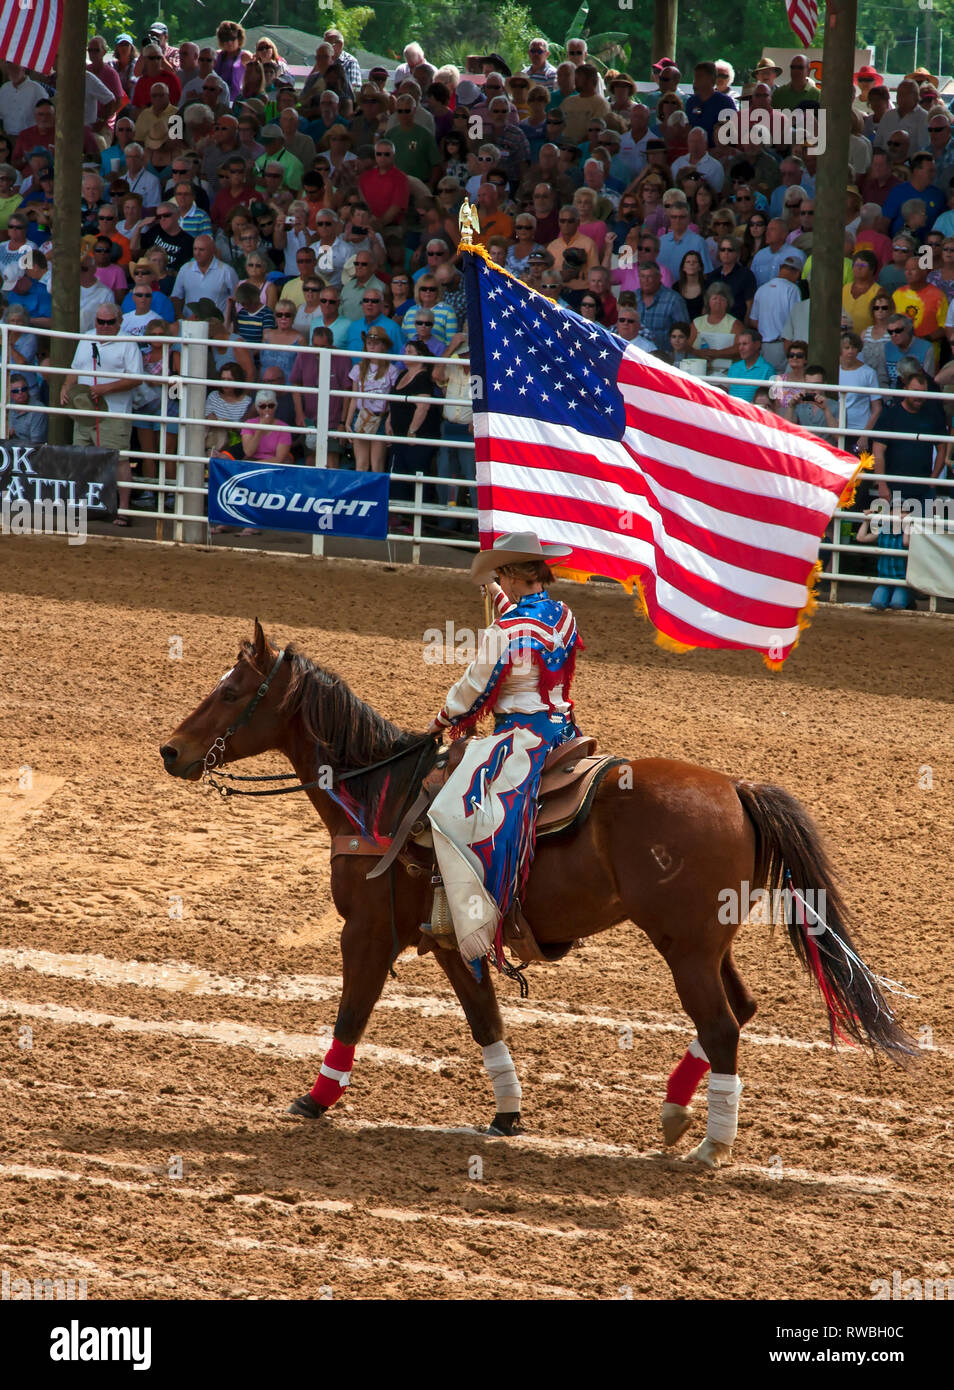 rodeo; cowgirl riding horse, carrying American flag; patriotic; western dress; red, white, blue, chaps; competition, crowd, spectators, Arcadia; FL; F Stock Photo